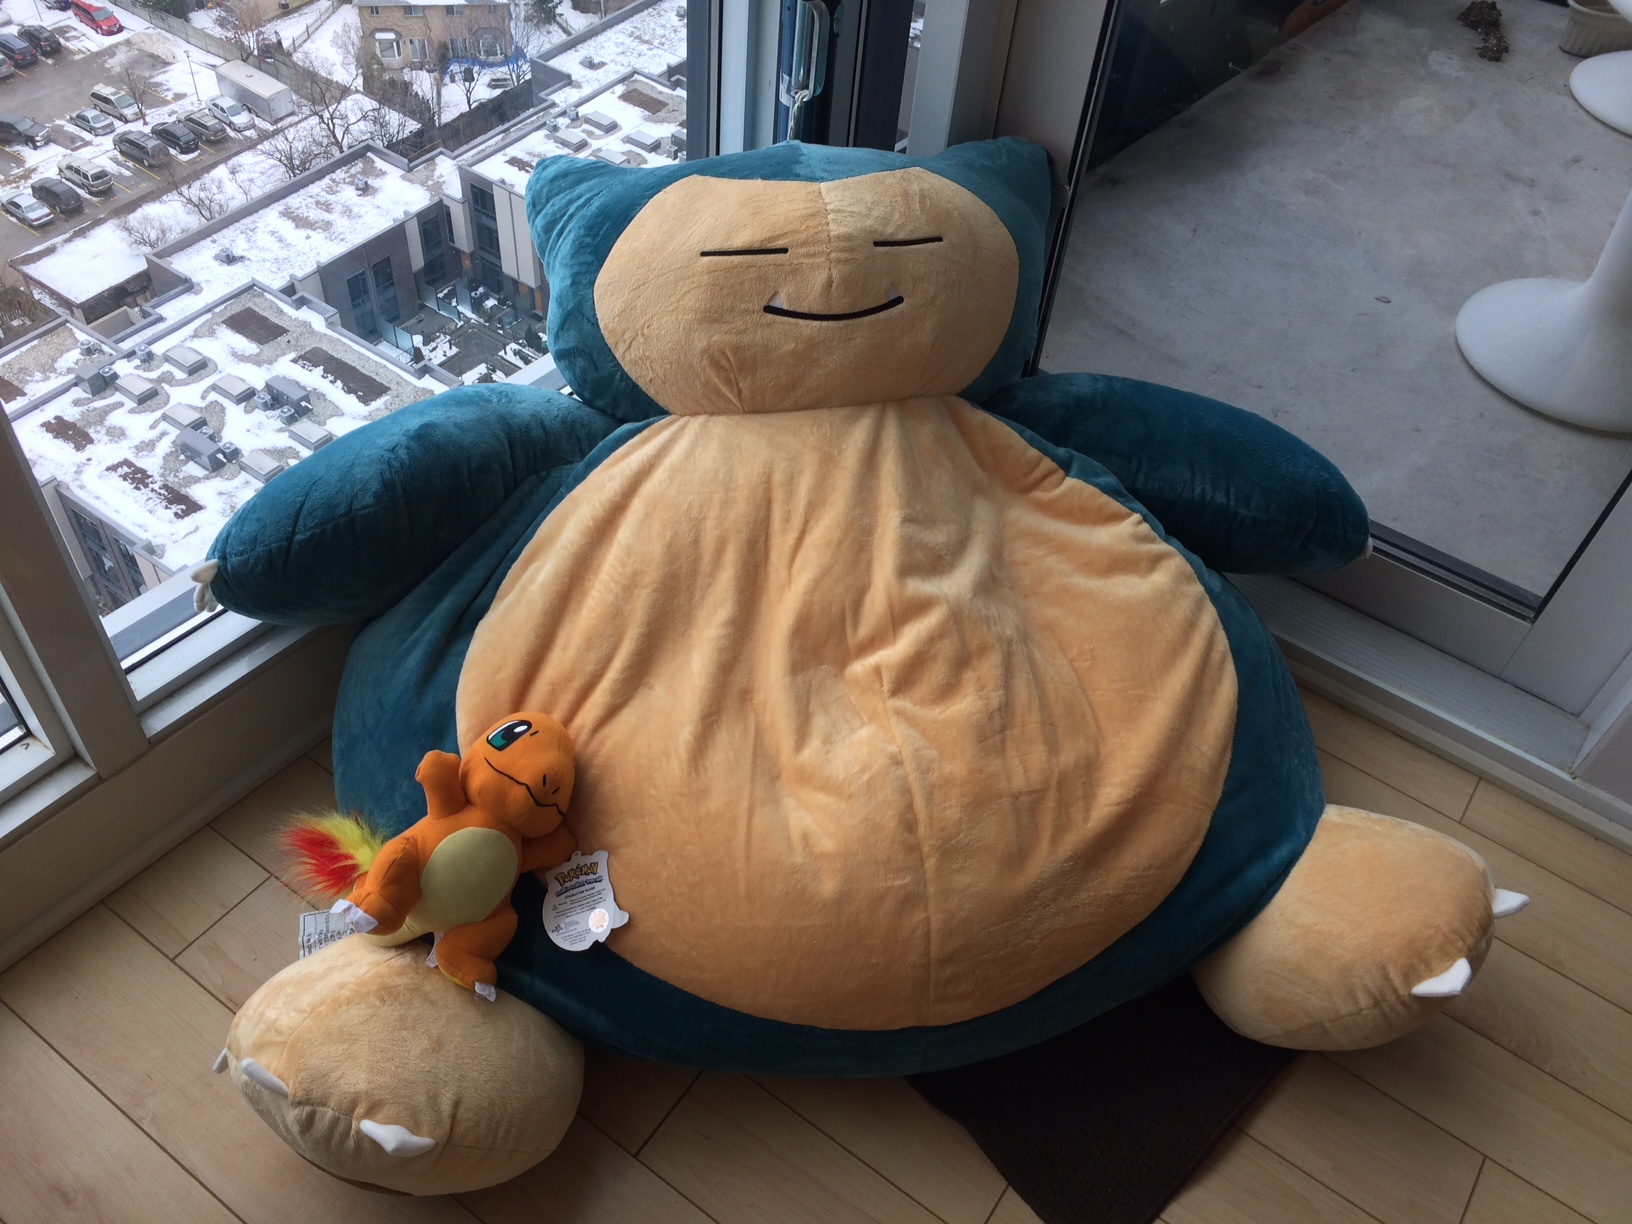 Amazon.com: Zhenfala Snorlax Bean Bag Chair Giant Unstuffed Snorlax Plush  Toy Anime Cover with Zipper for Girlfriend Birthday Gifts (78INCH/20OCM,  Squish) : Toys & Games